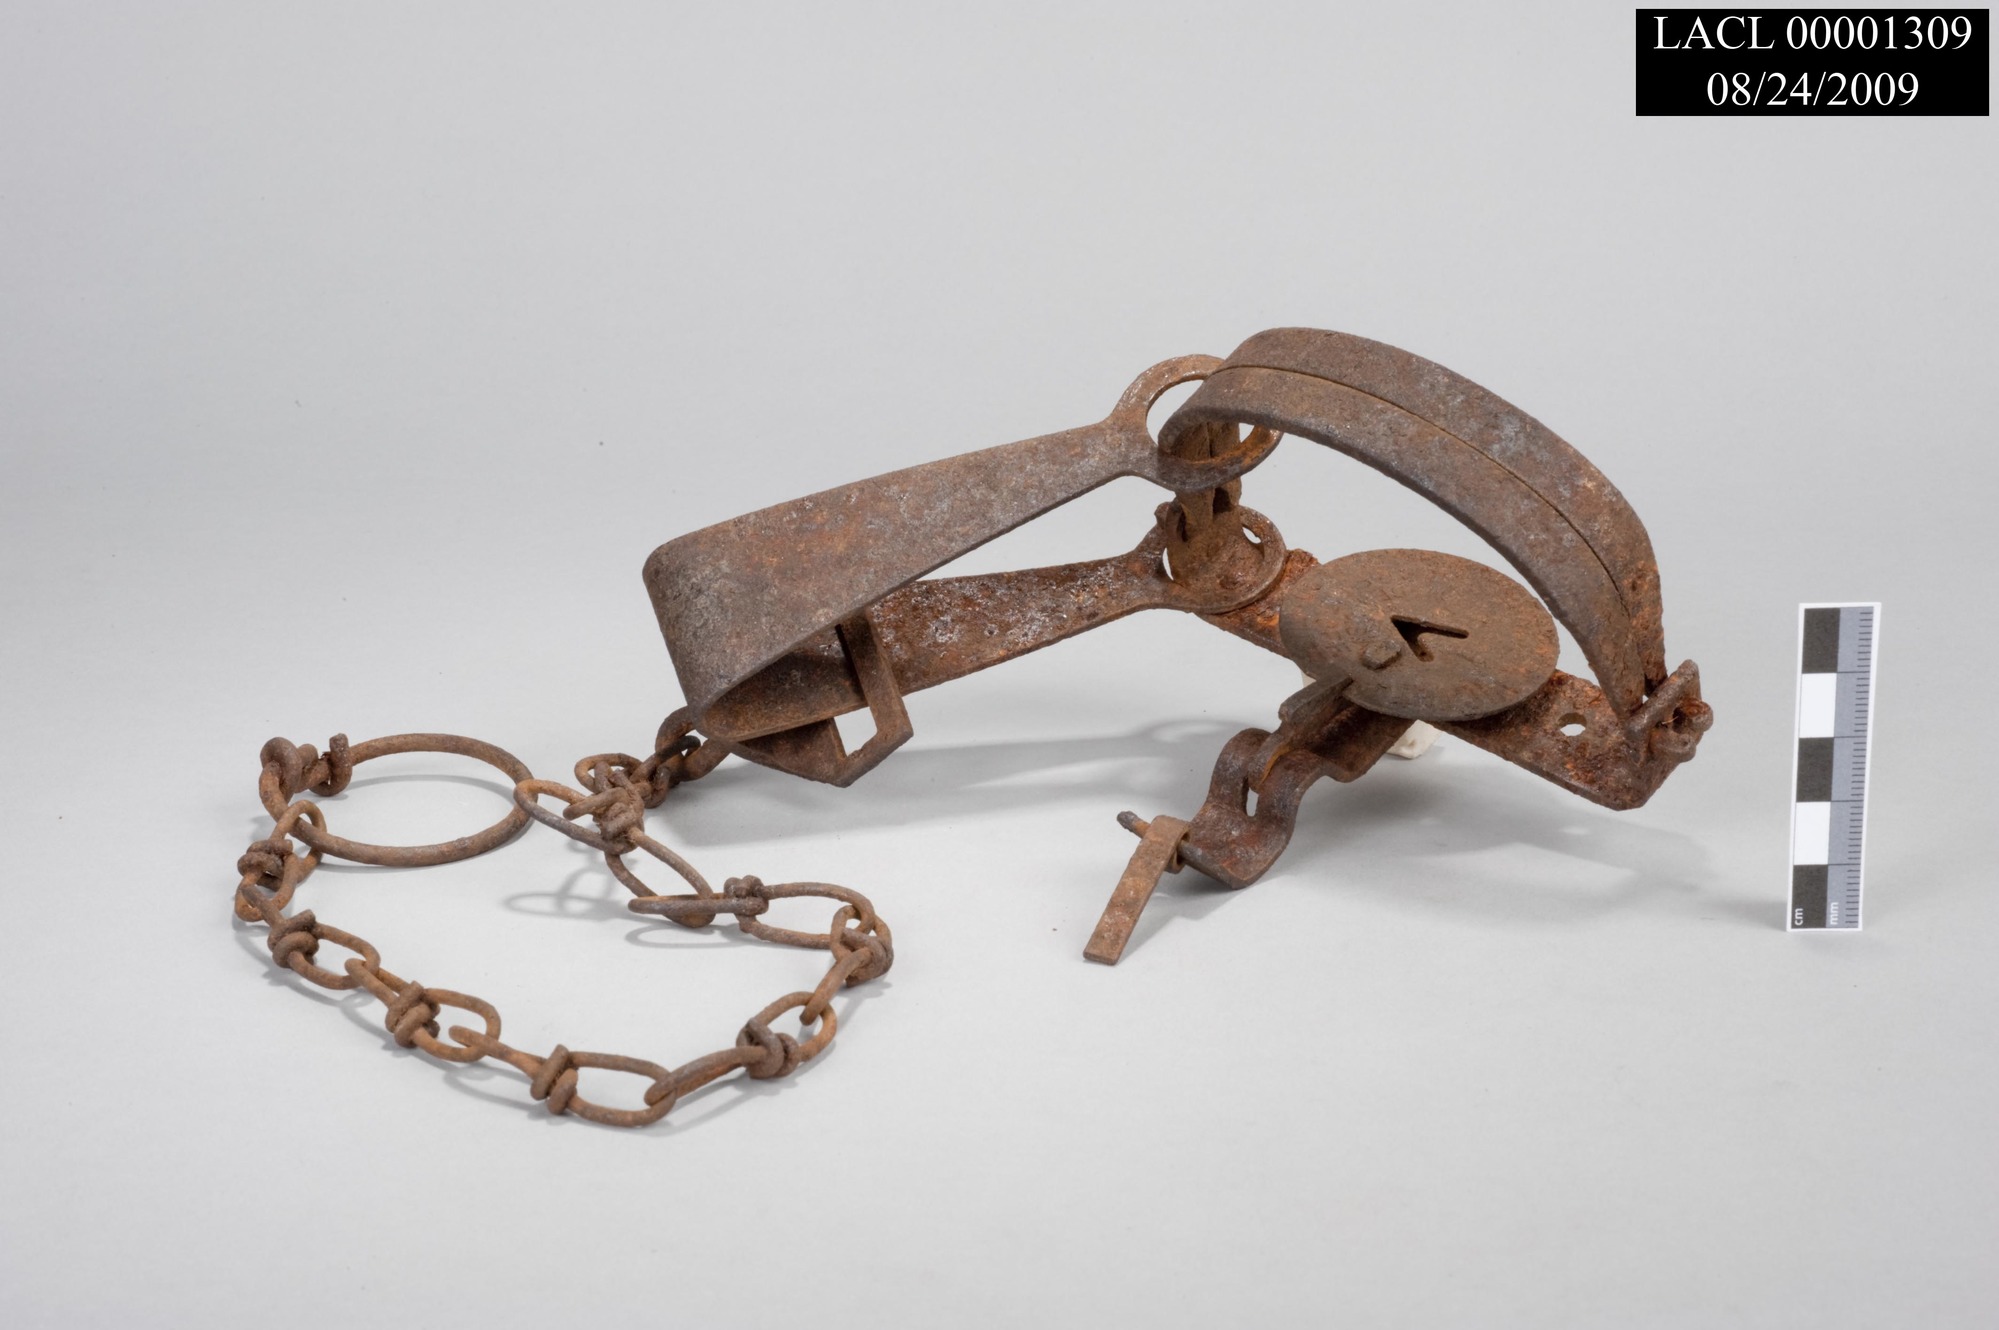 Image of rusted animal trap with chain.